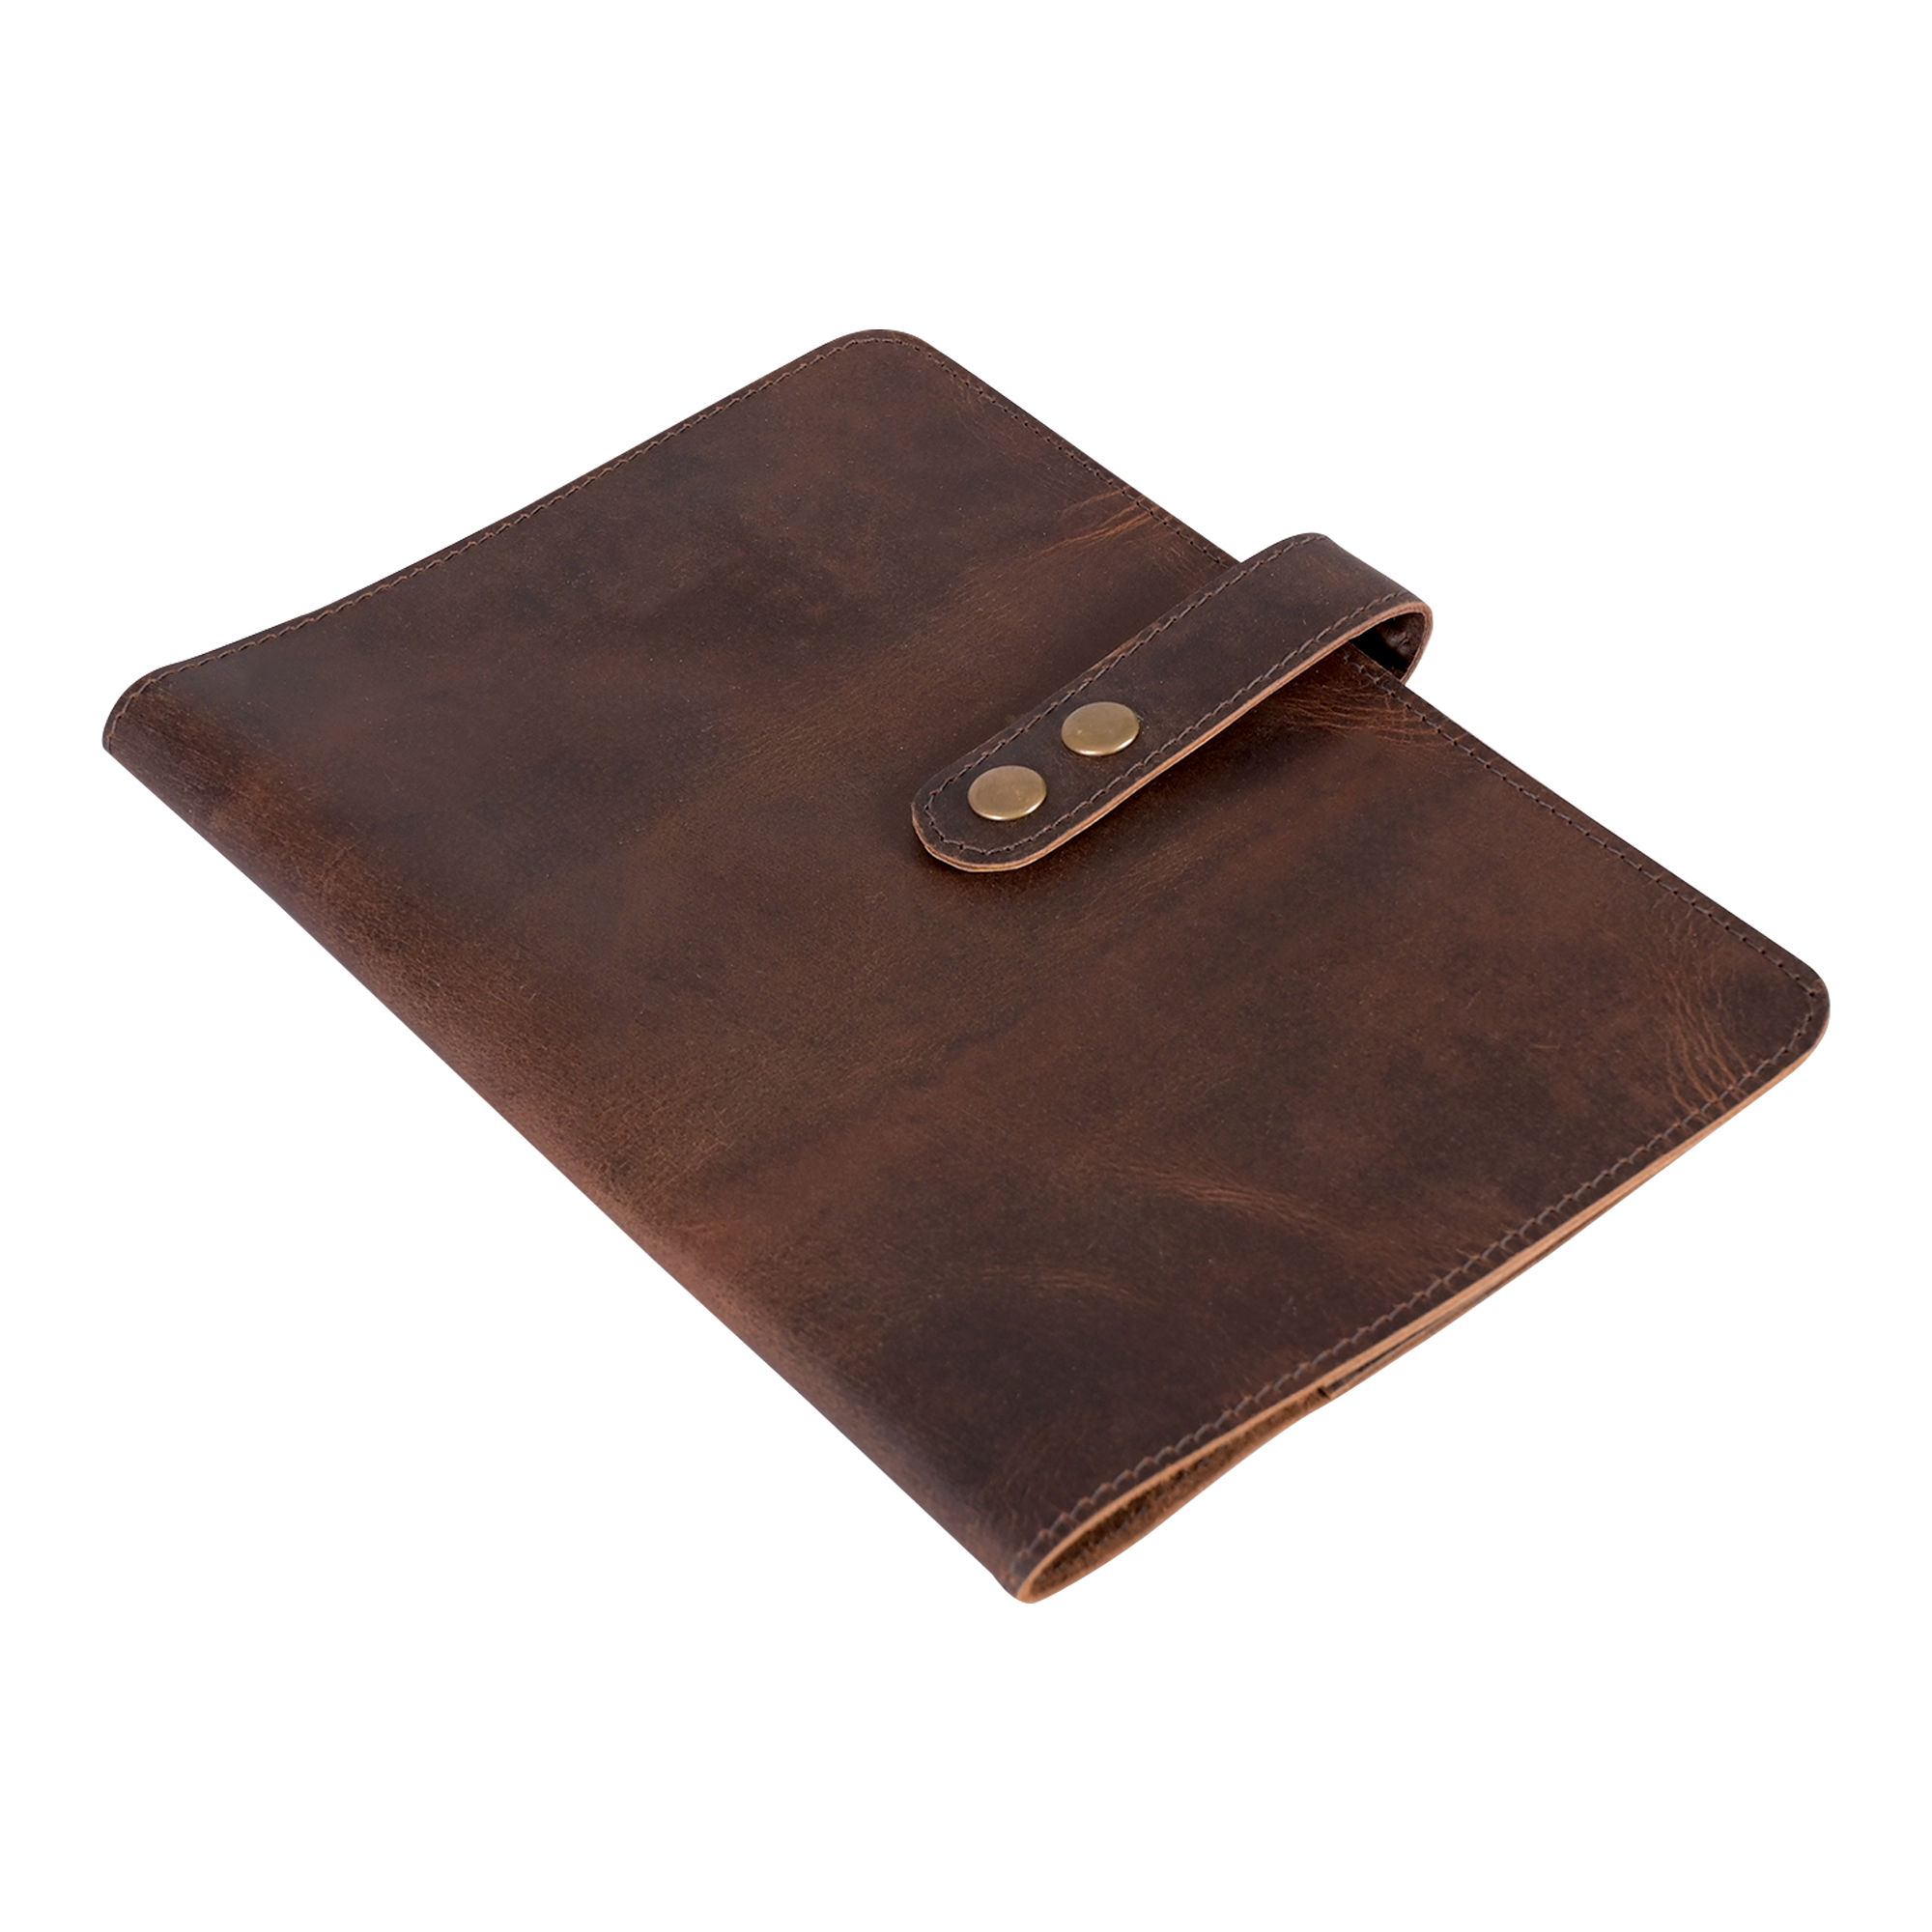 Xtra Small Thin Leather Bible Cover